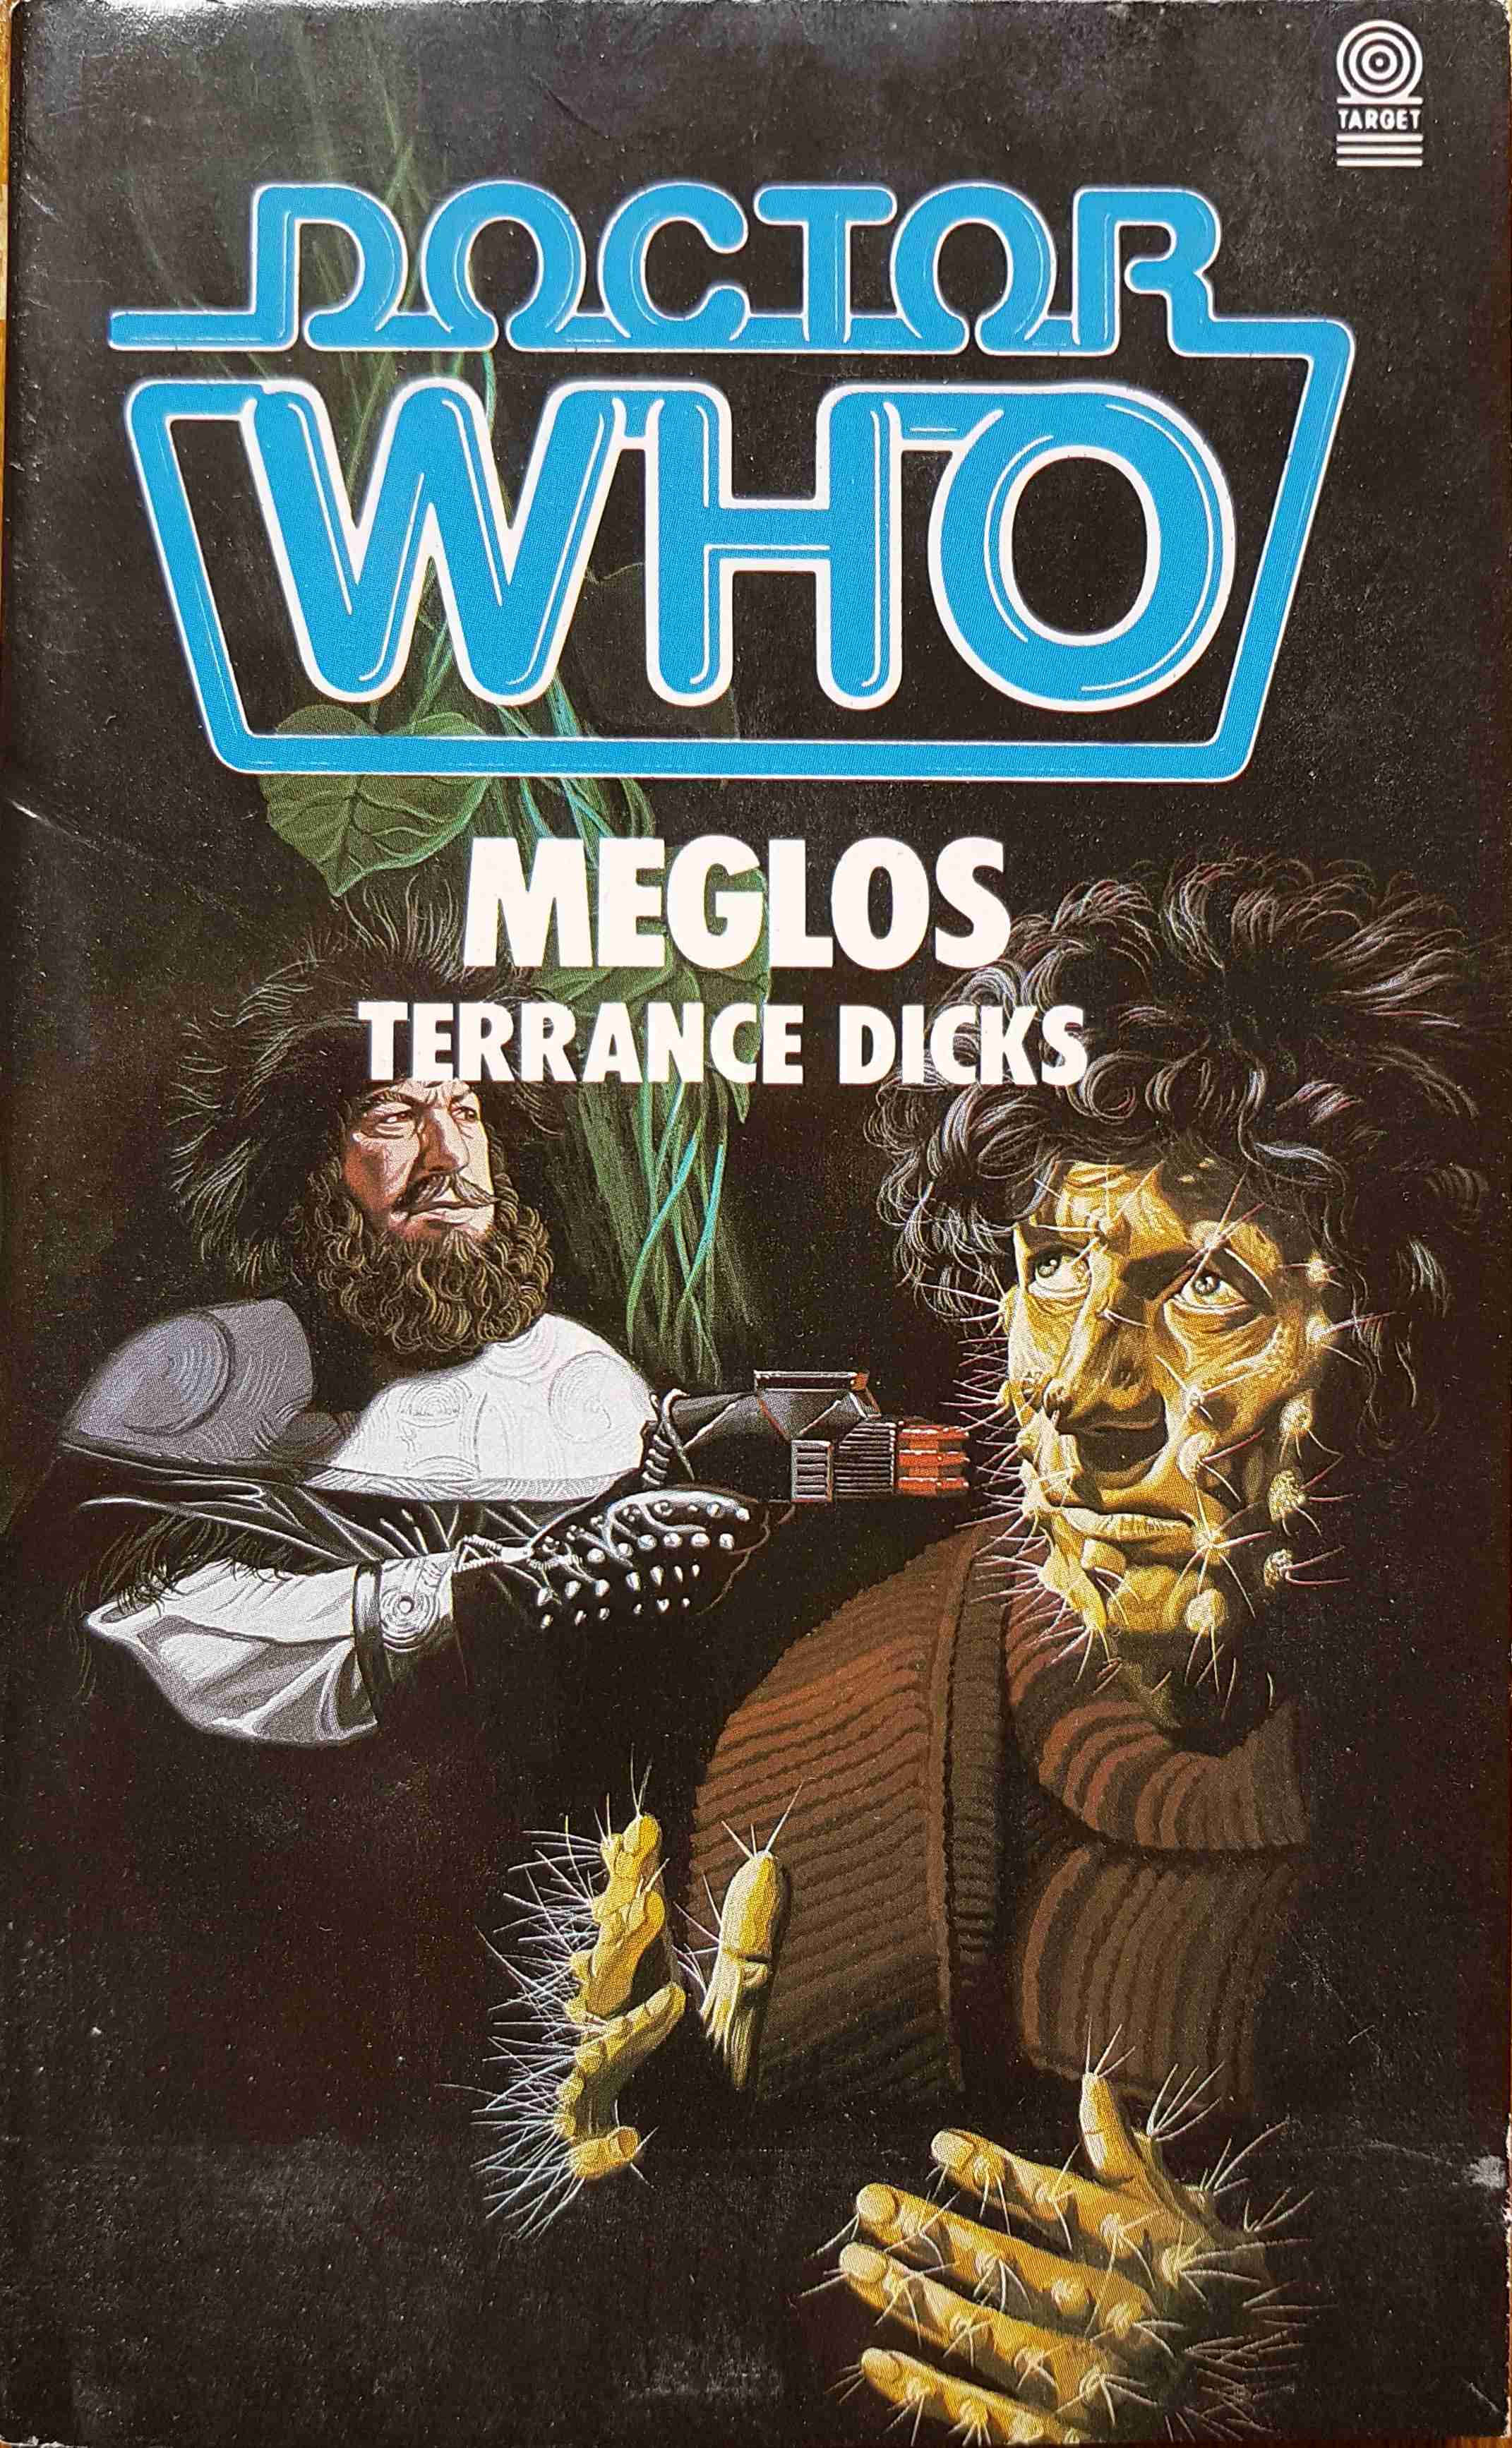 Picture of 0-426-20316-X Doctor Who - Meglos by artist Terrance Dicks from the BBC books - Records and Tapes library